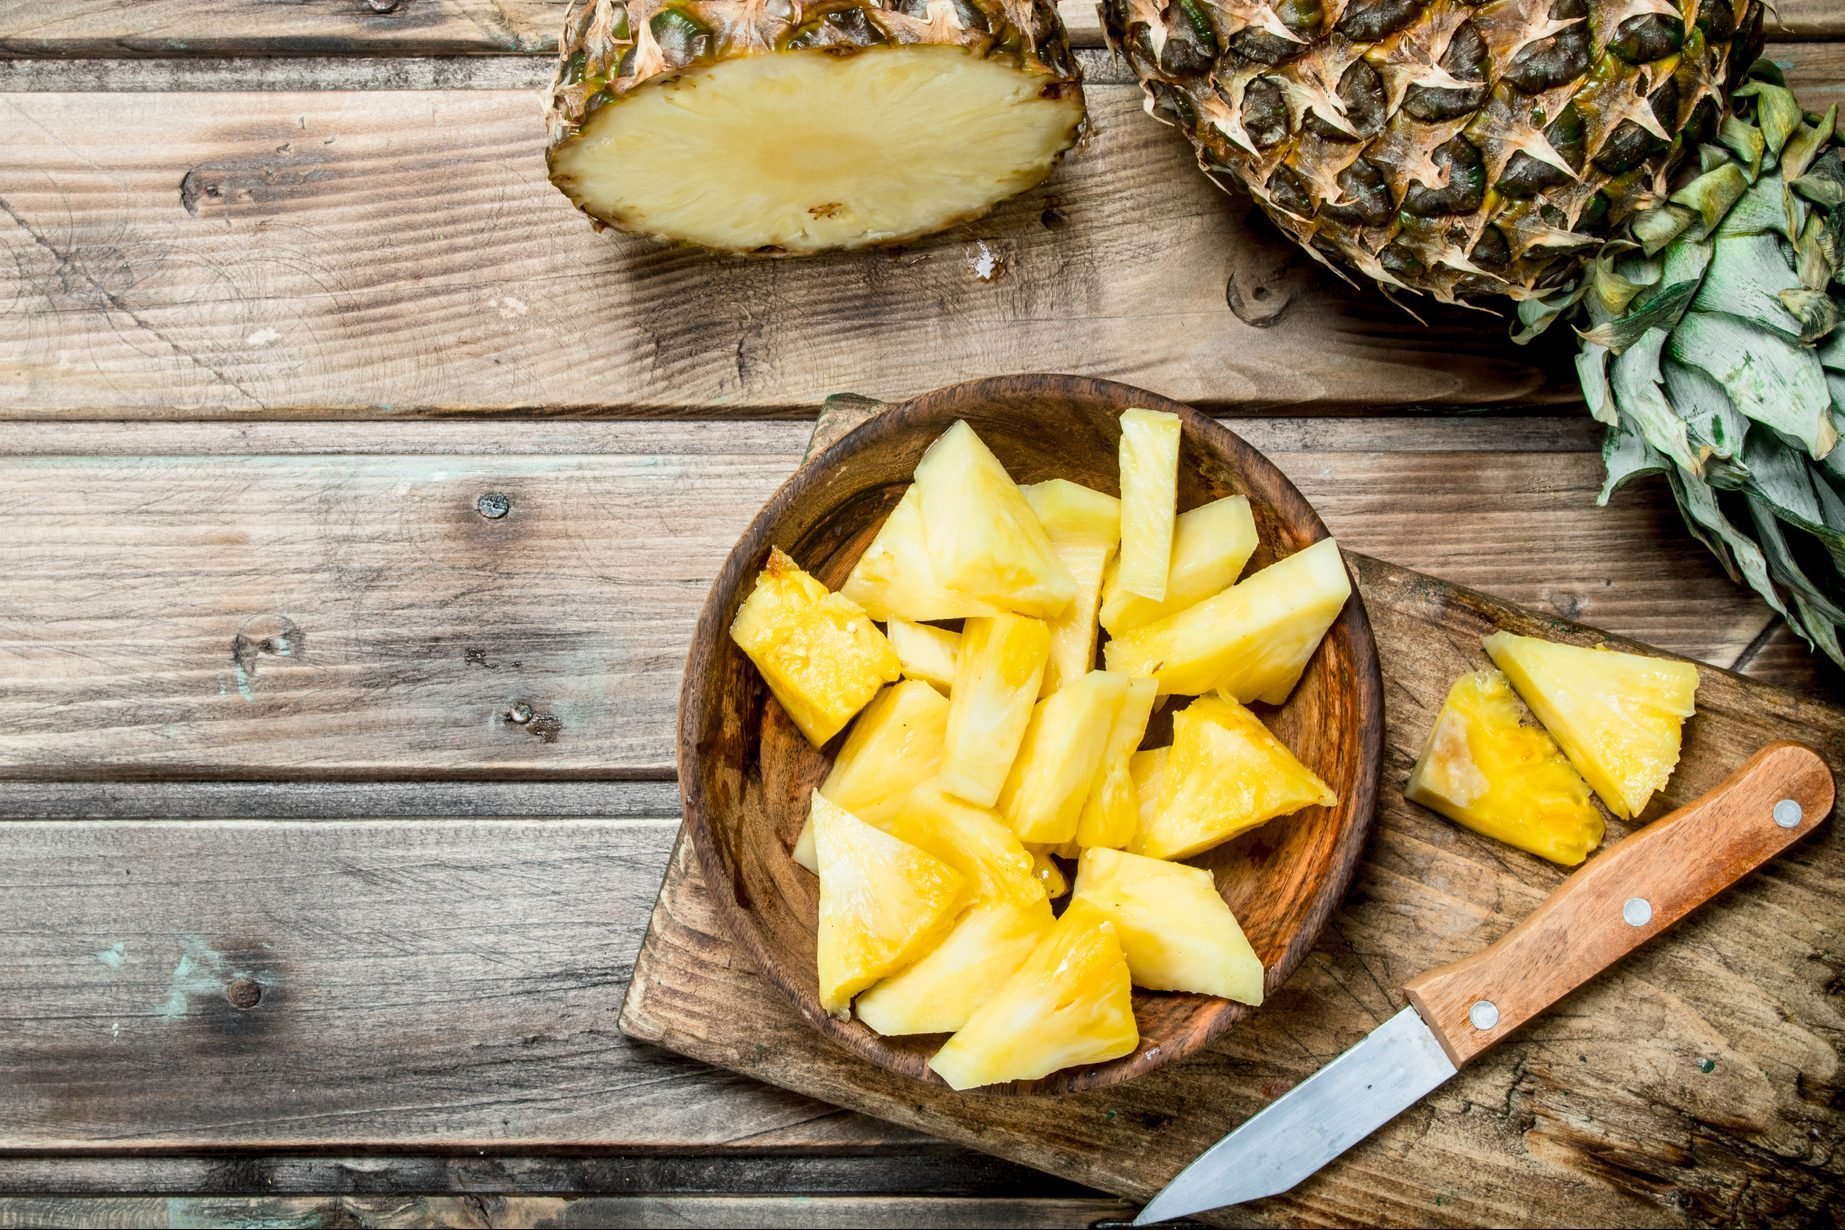 Is it safe to eat pineapple if you have diabetes?